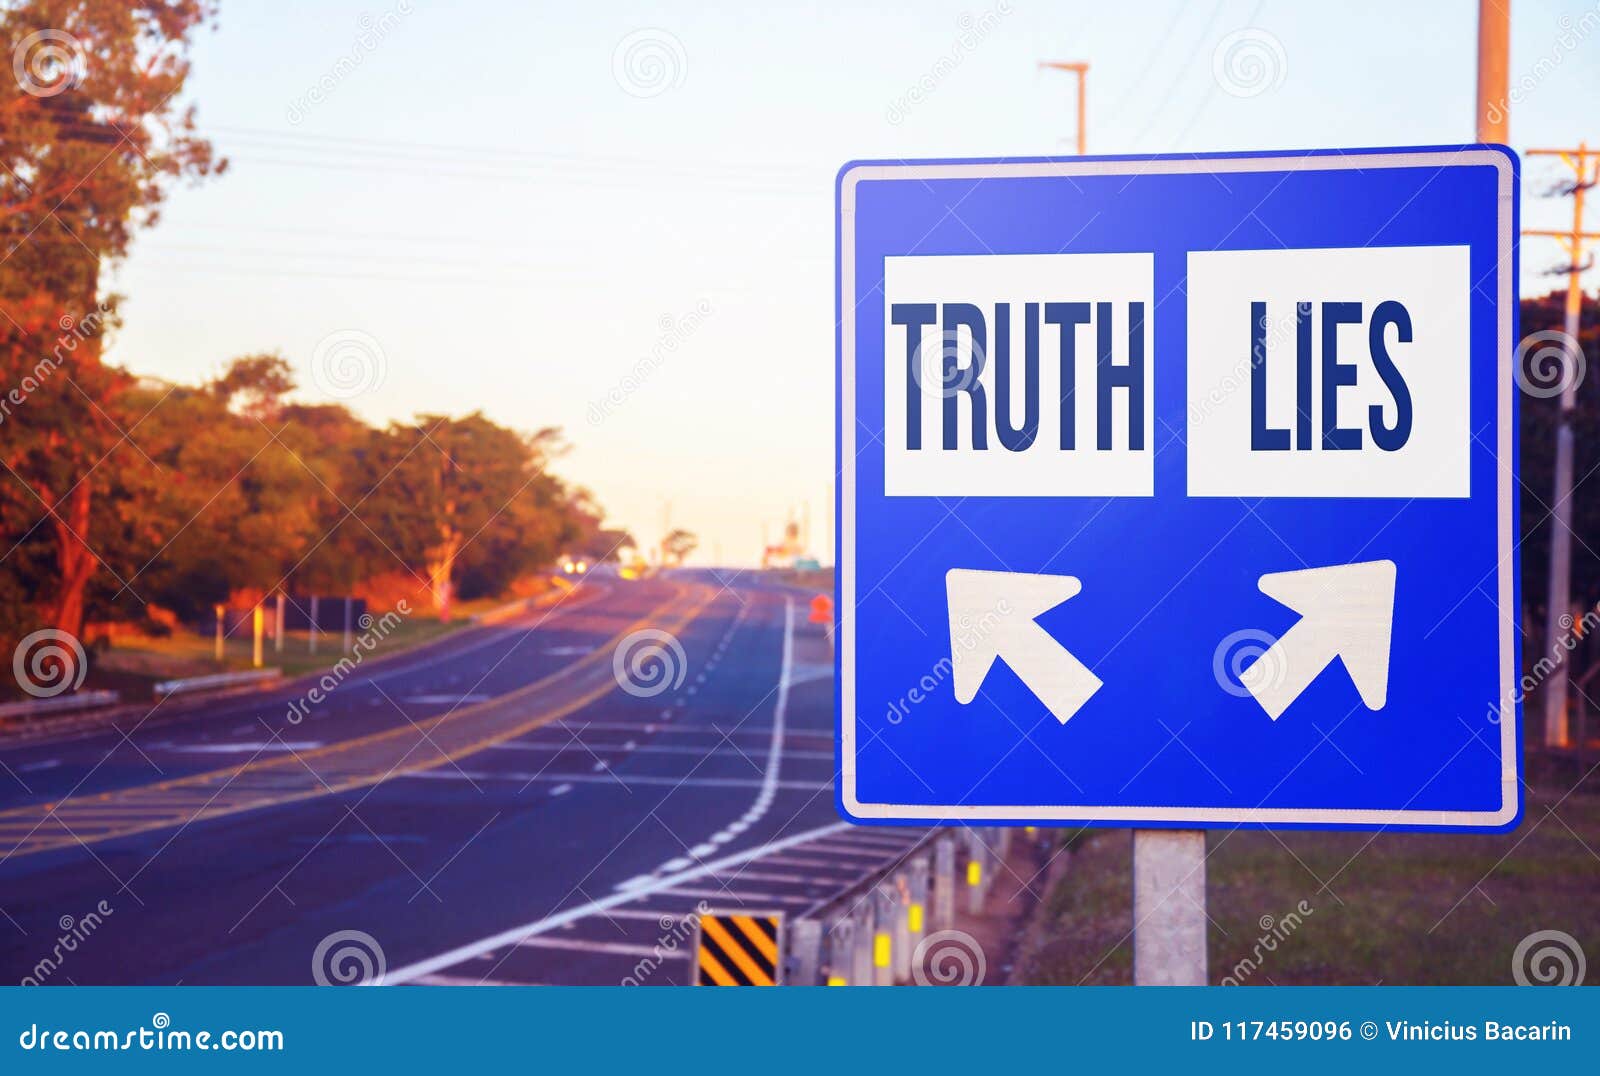 truth or lies choices, decision, option.